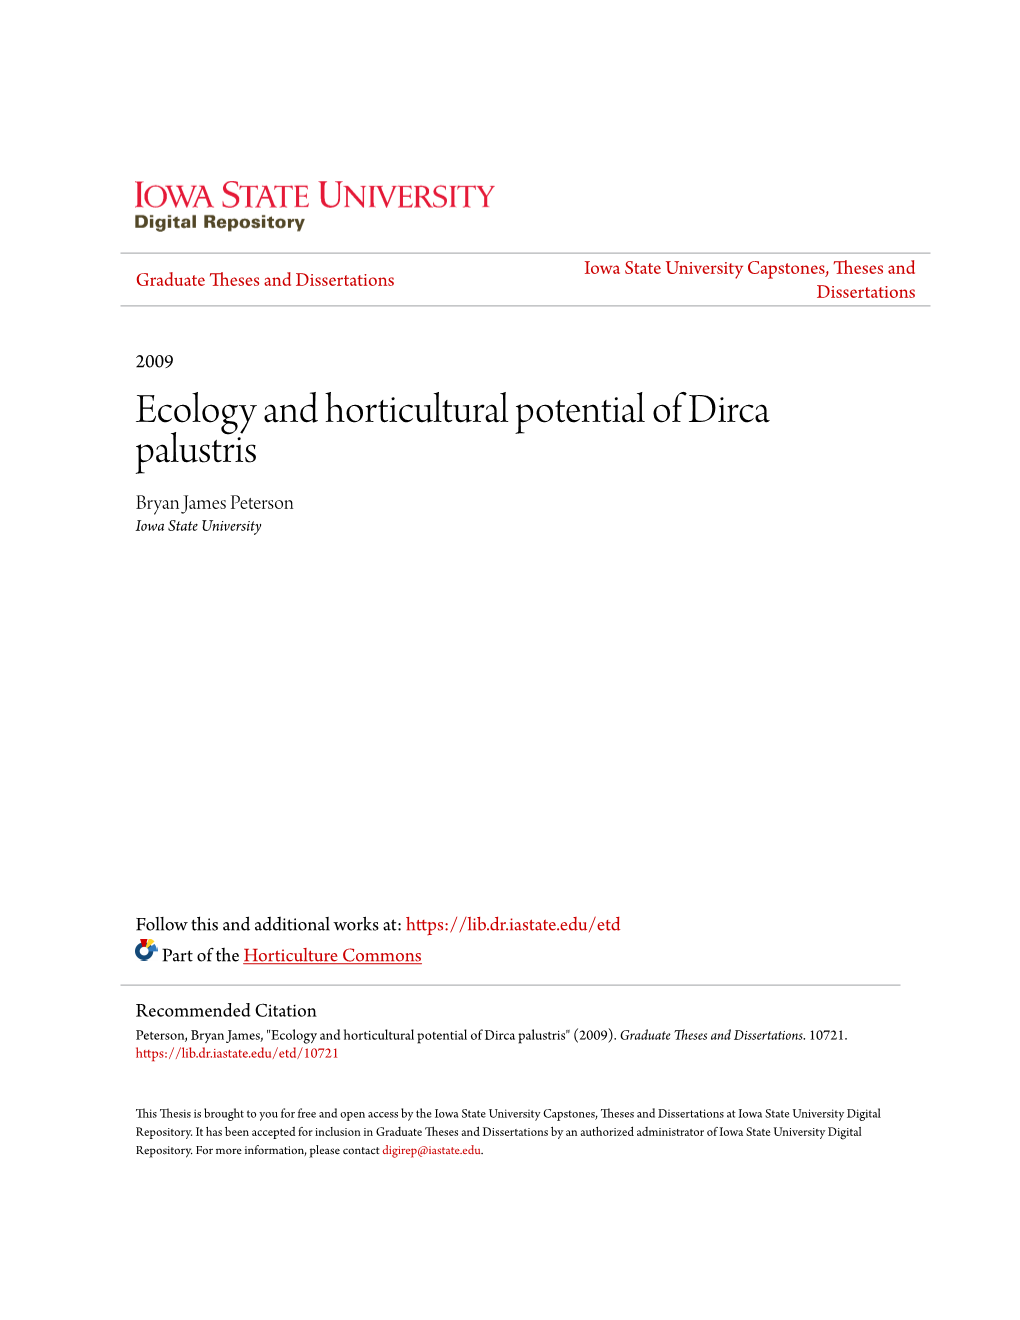 Ecology and Horticultural Potential of Dirca Palustris Bryan James Peterson Iowa State University